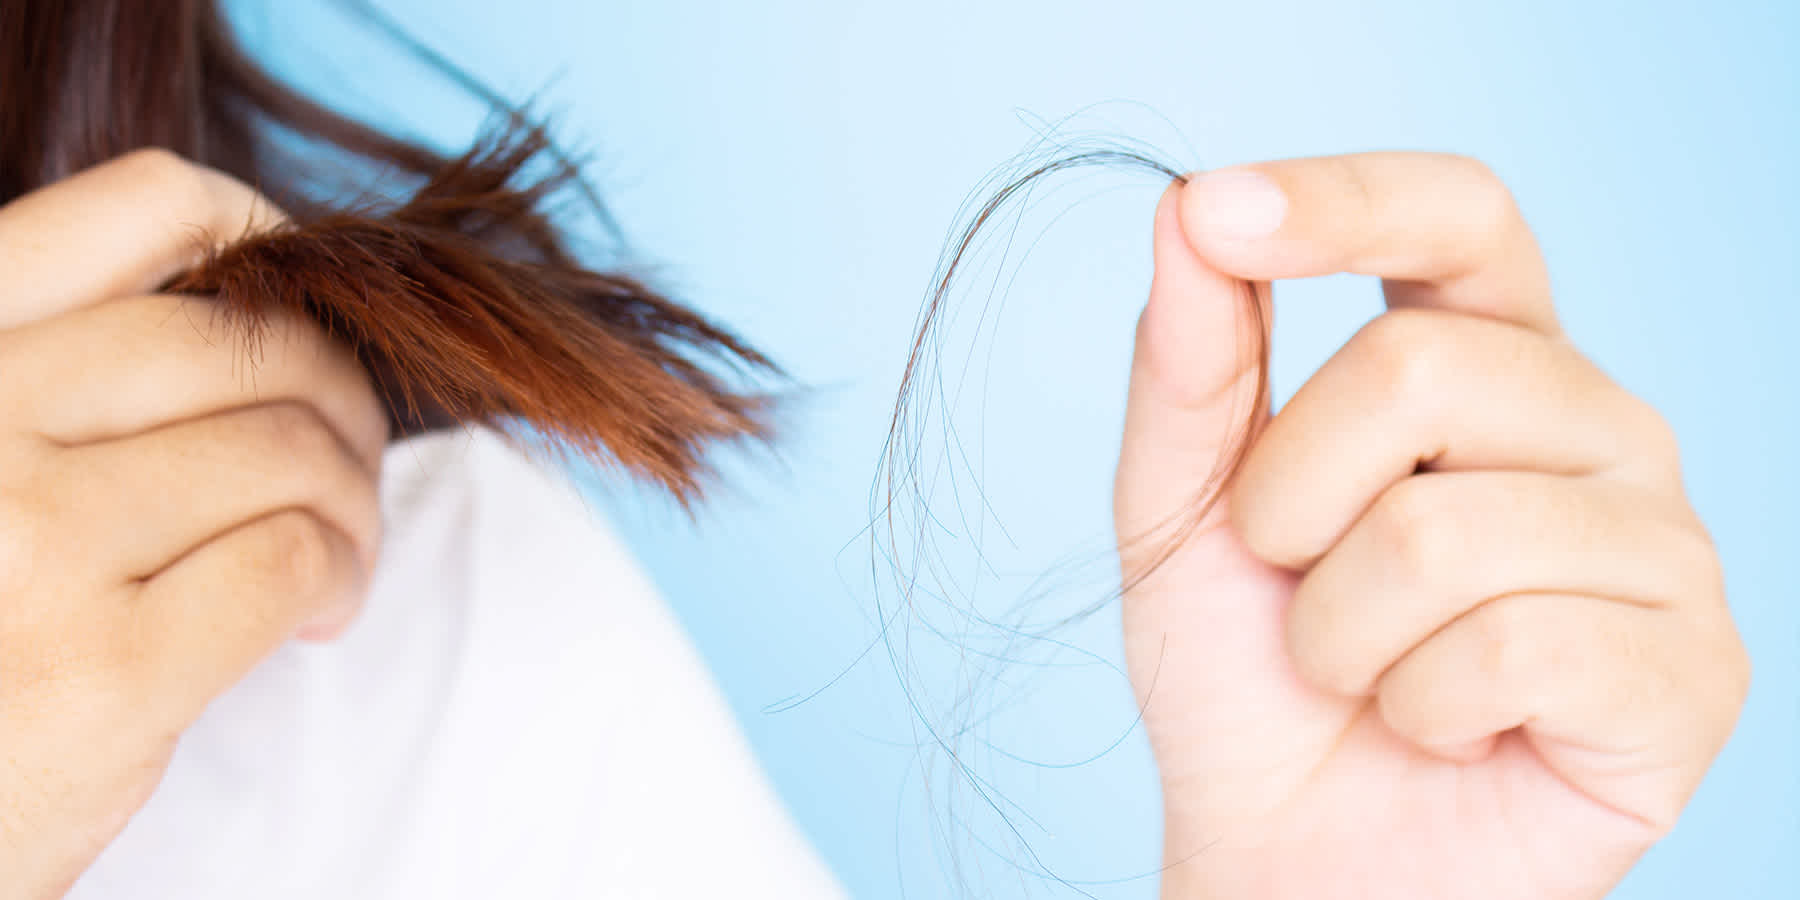 What Hormones Cause Hair Loss in Females?